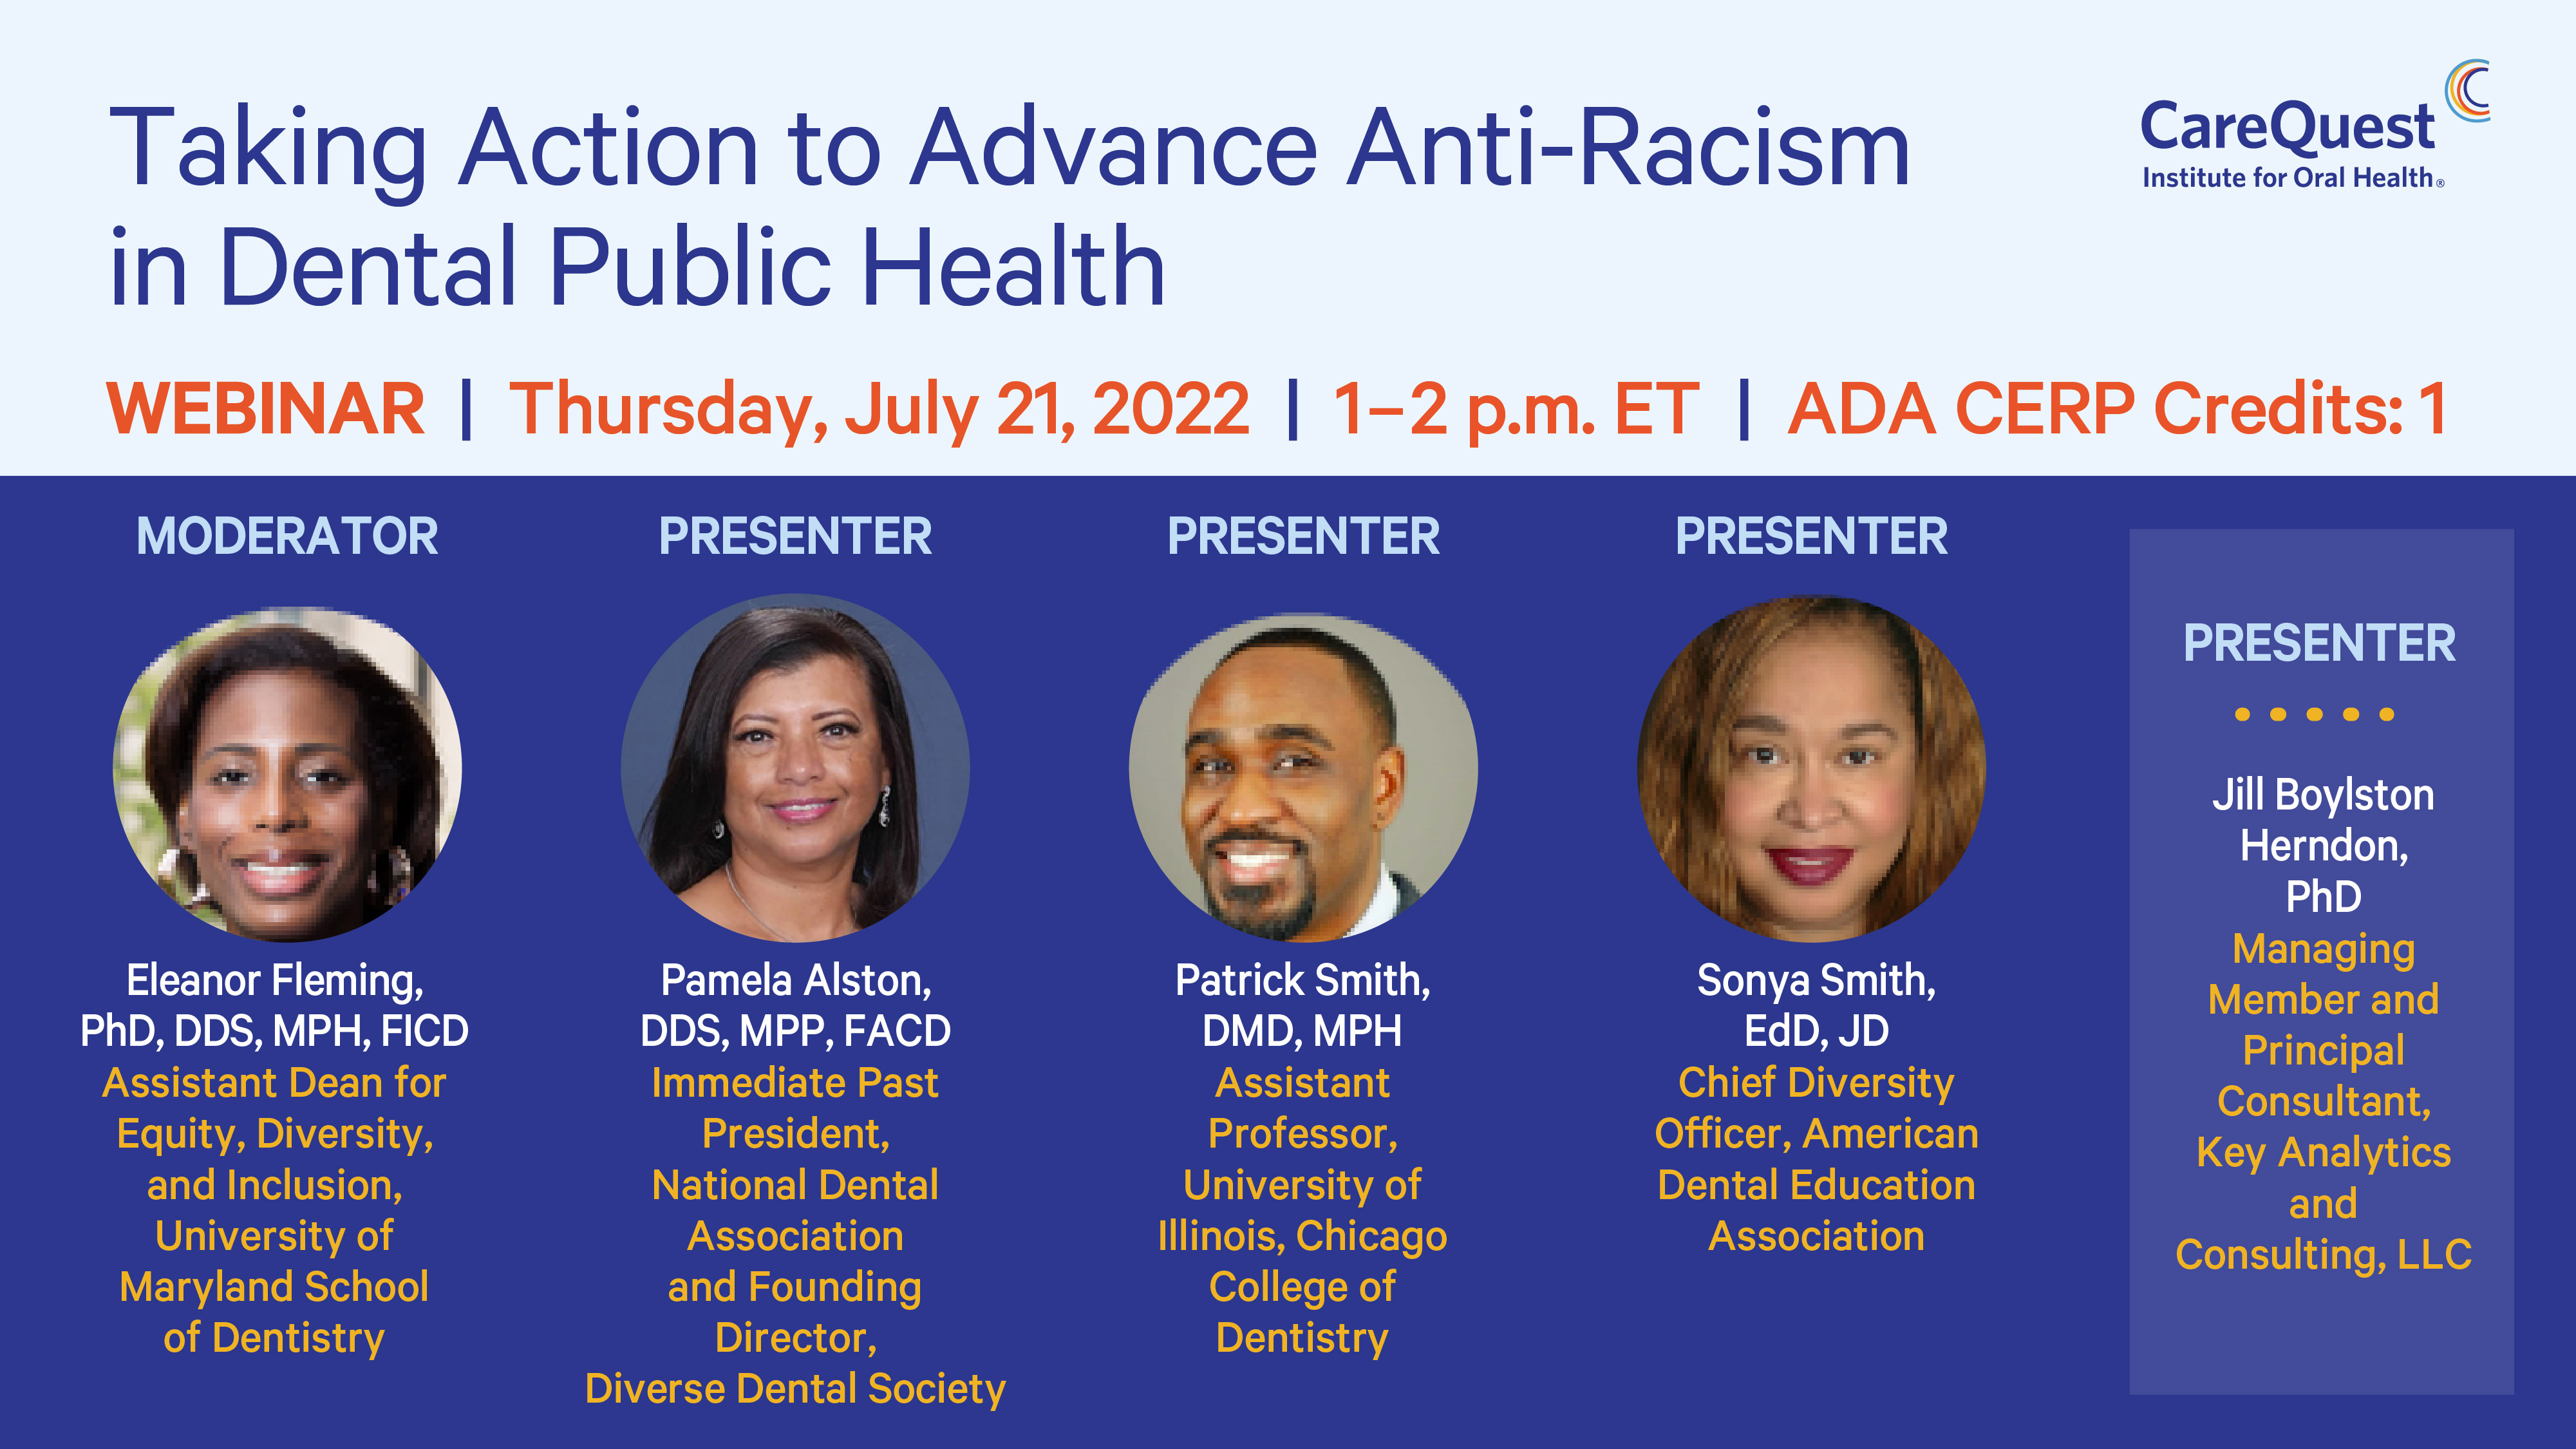 Taking Action to Advance Anti-Racism in Dental Public Health